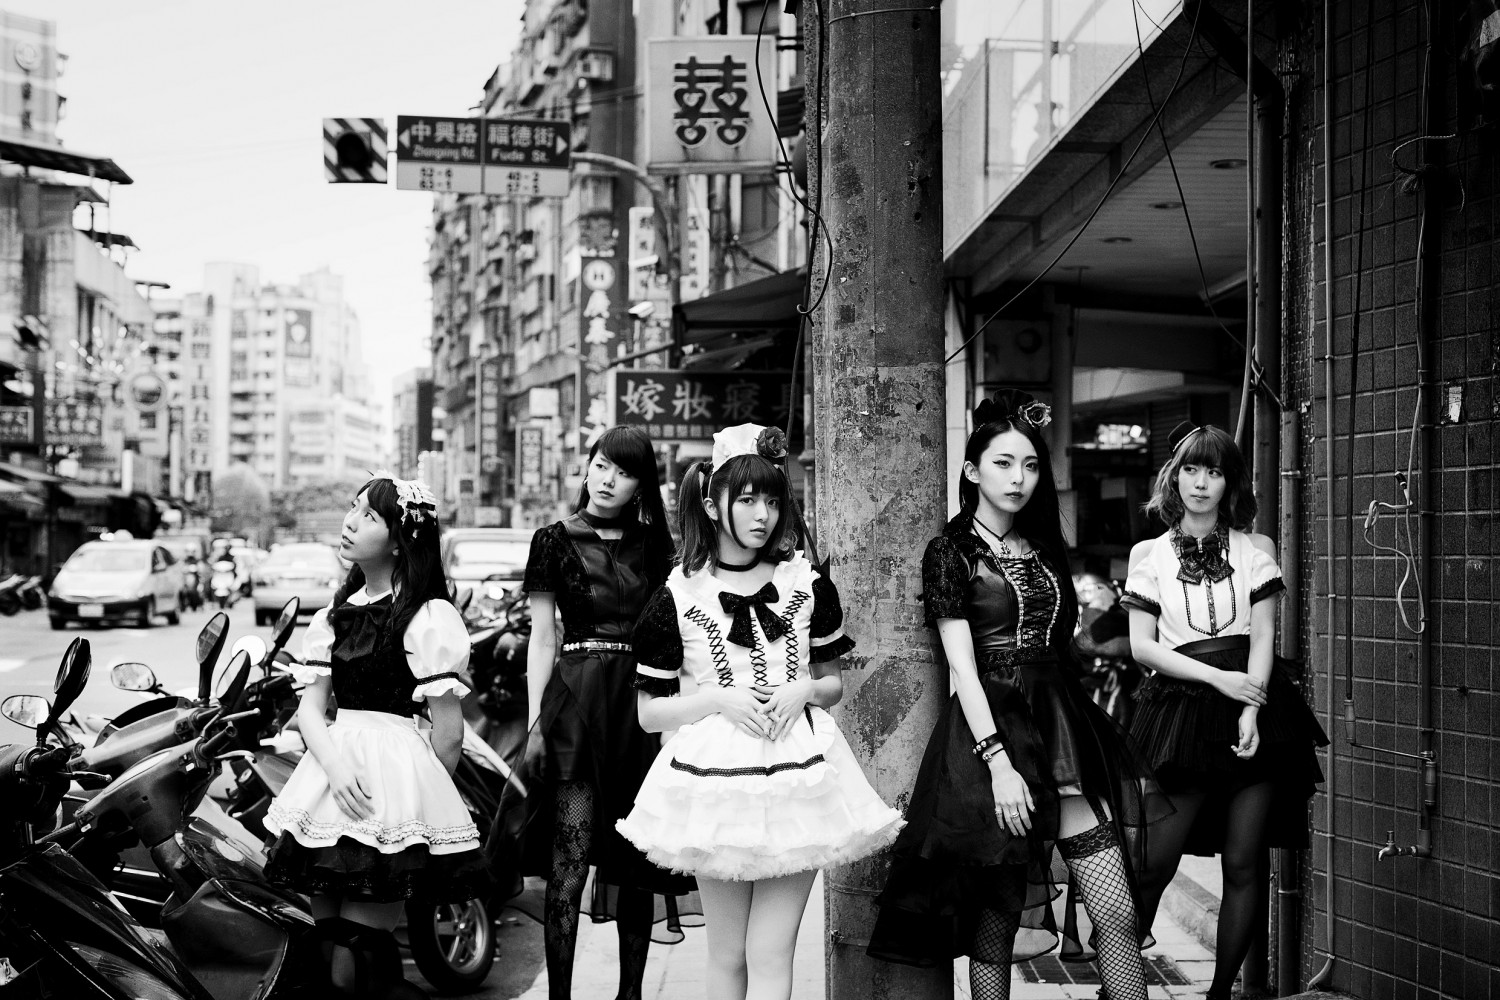 BAND-MAID Visit Taiwan in the MV for “Daydreaming”!